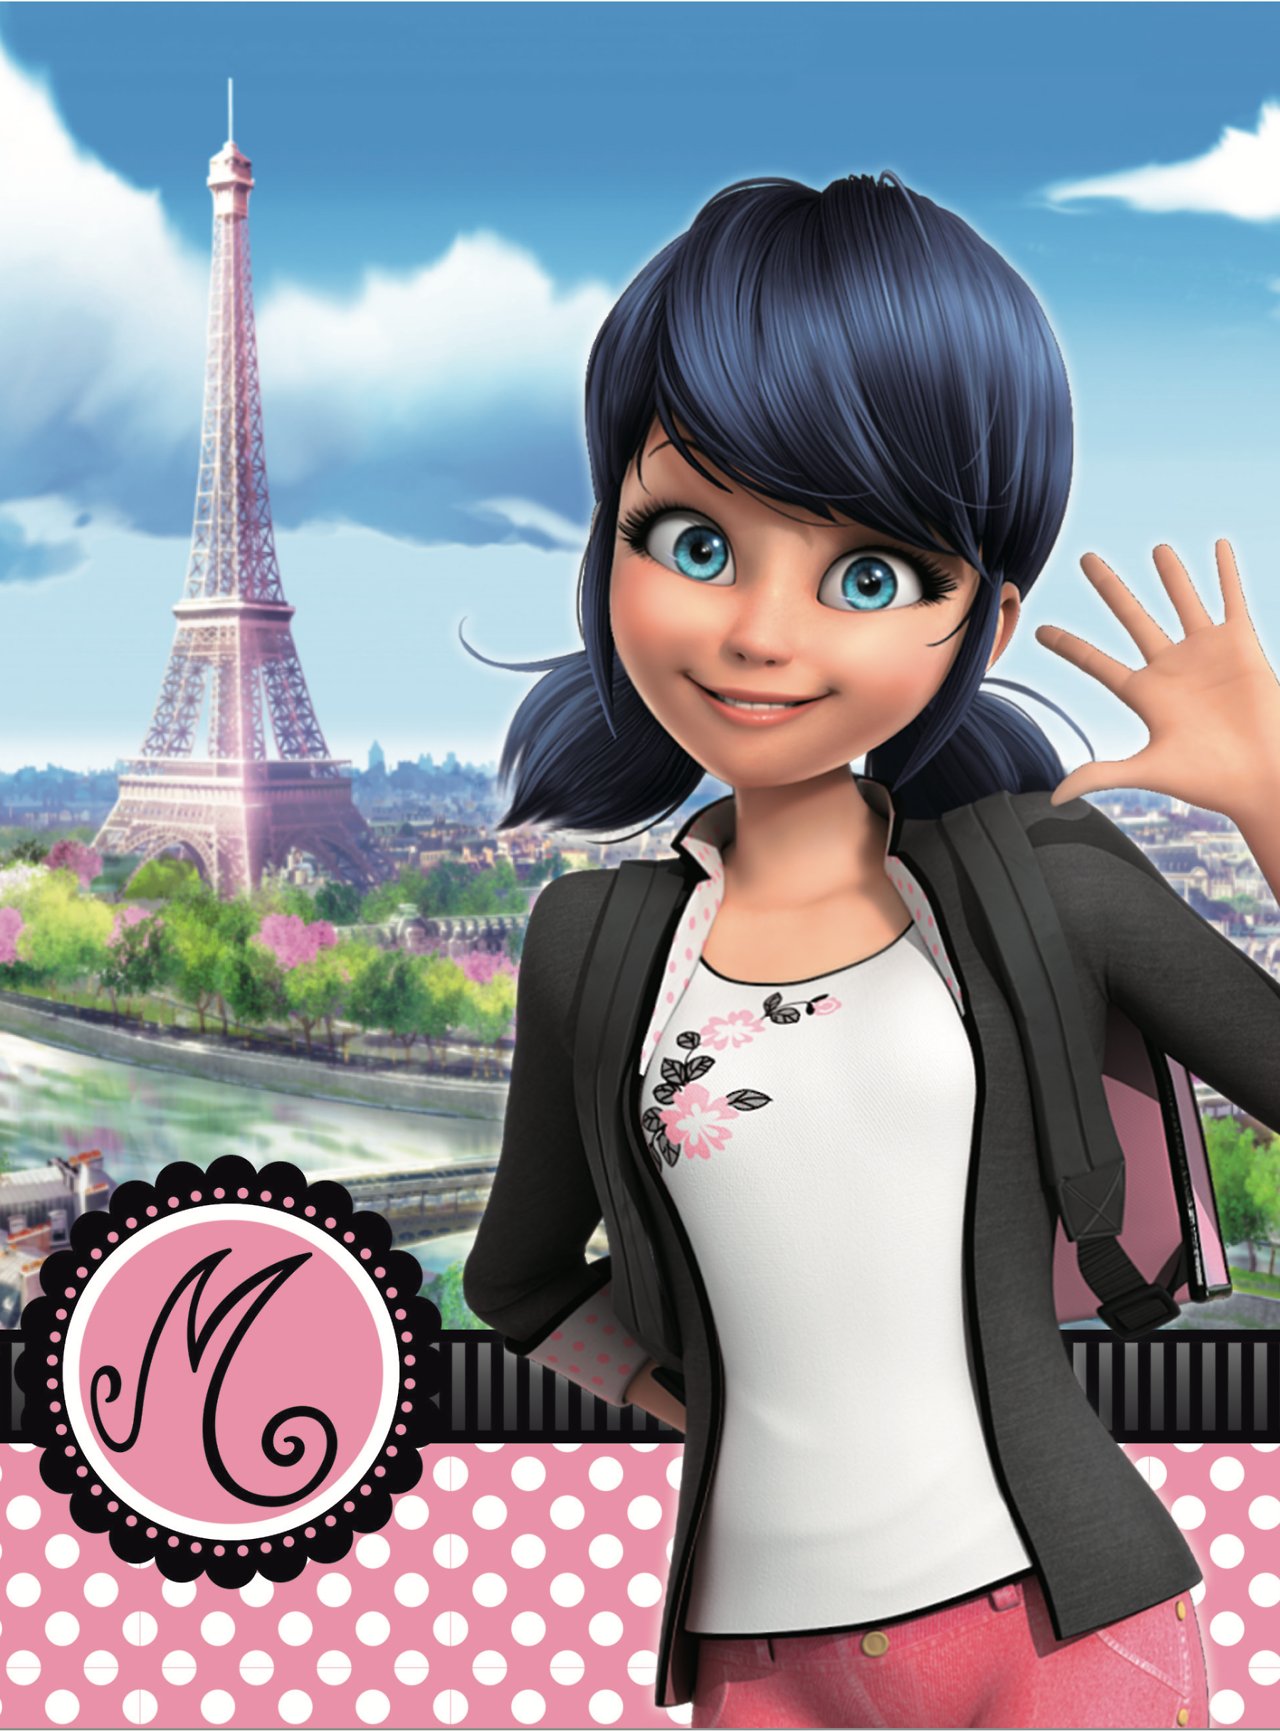 A Girl With A Pink Polka Dot Dress And A Eiffel Tower